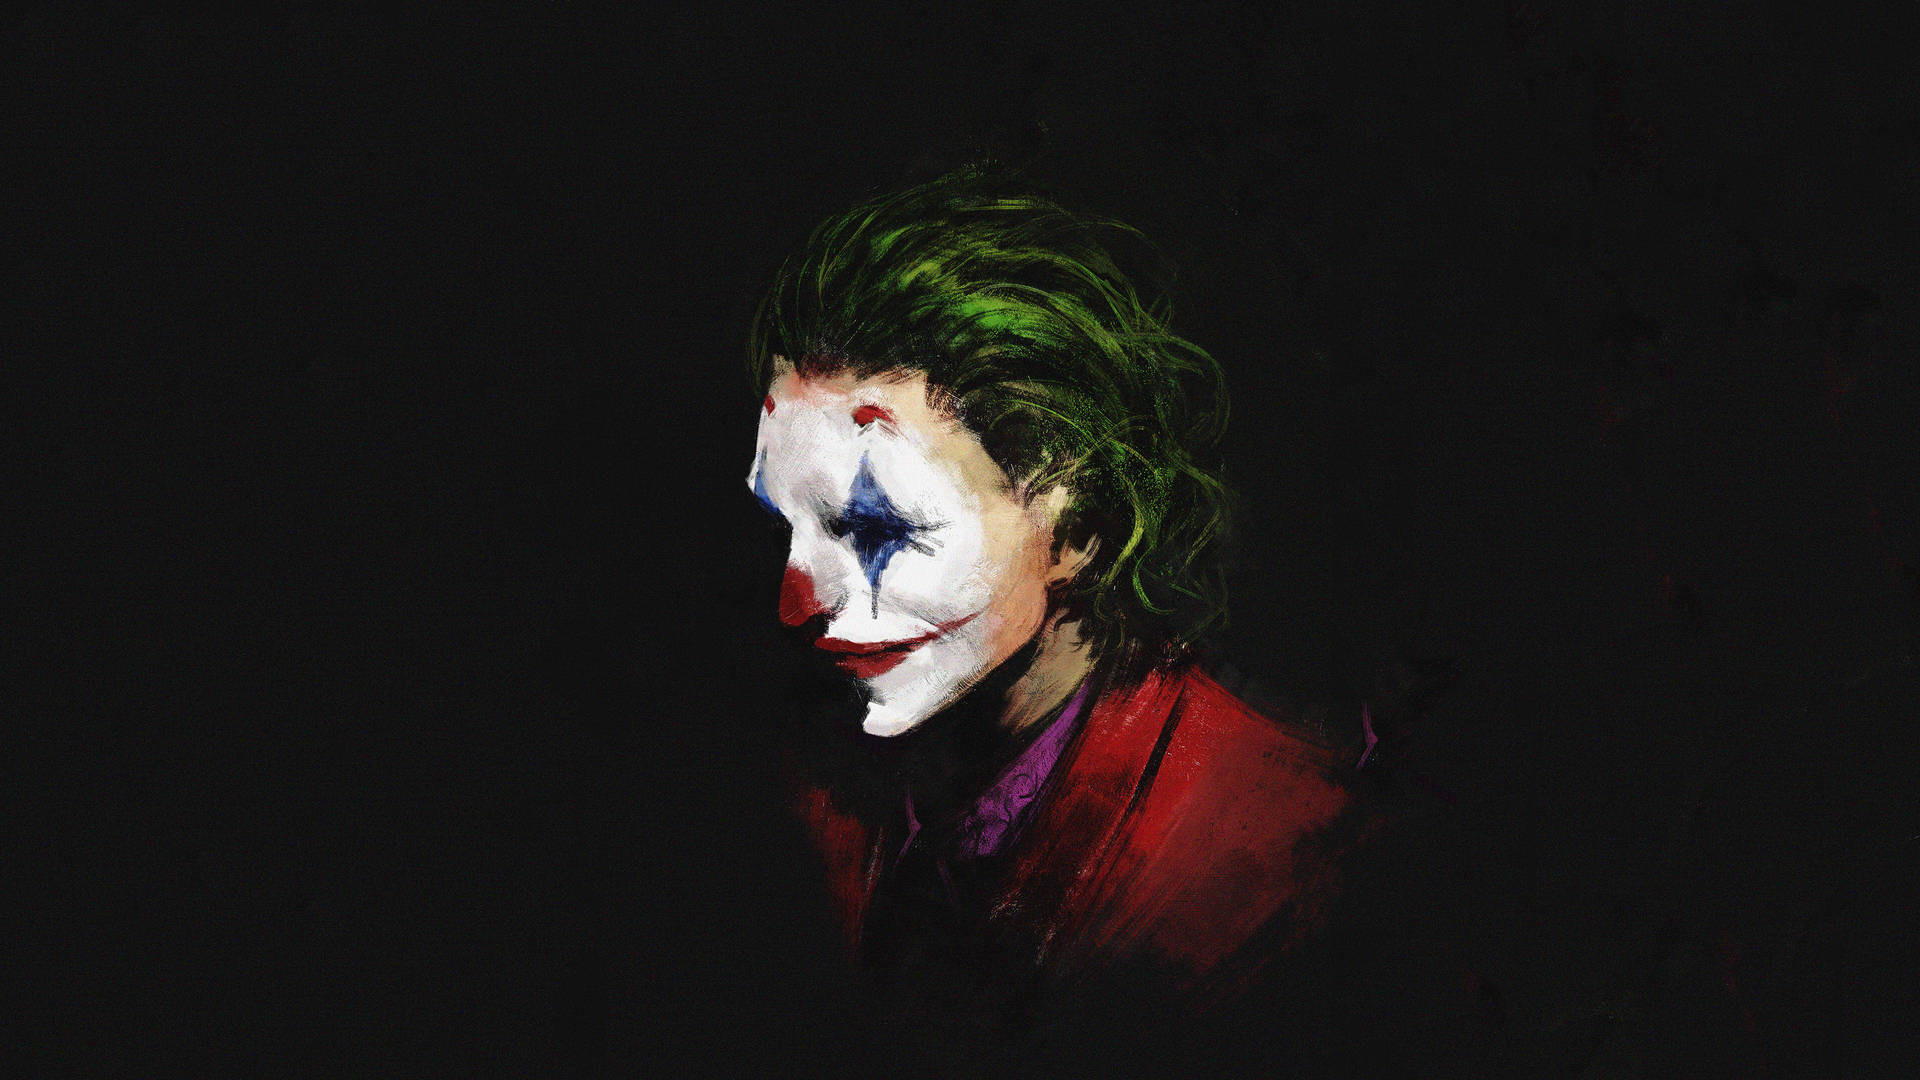 Black Ultra Hd Joker With Pointed Nose Wallpaper